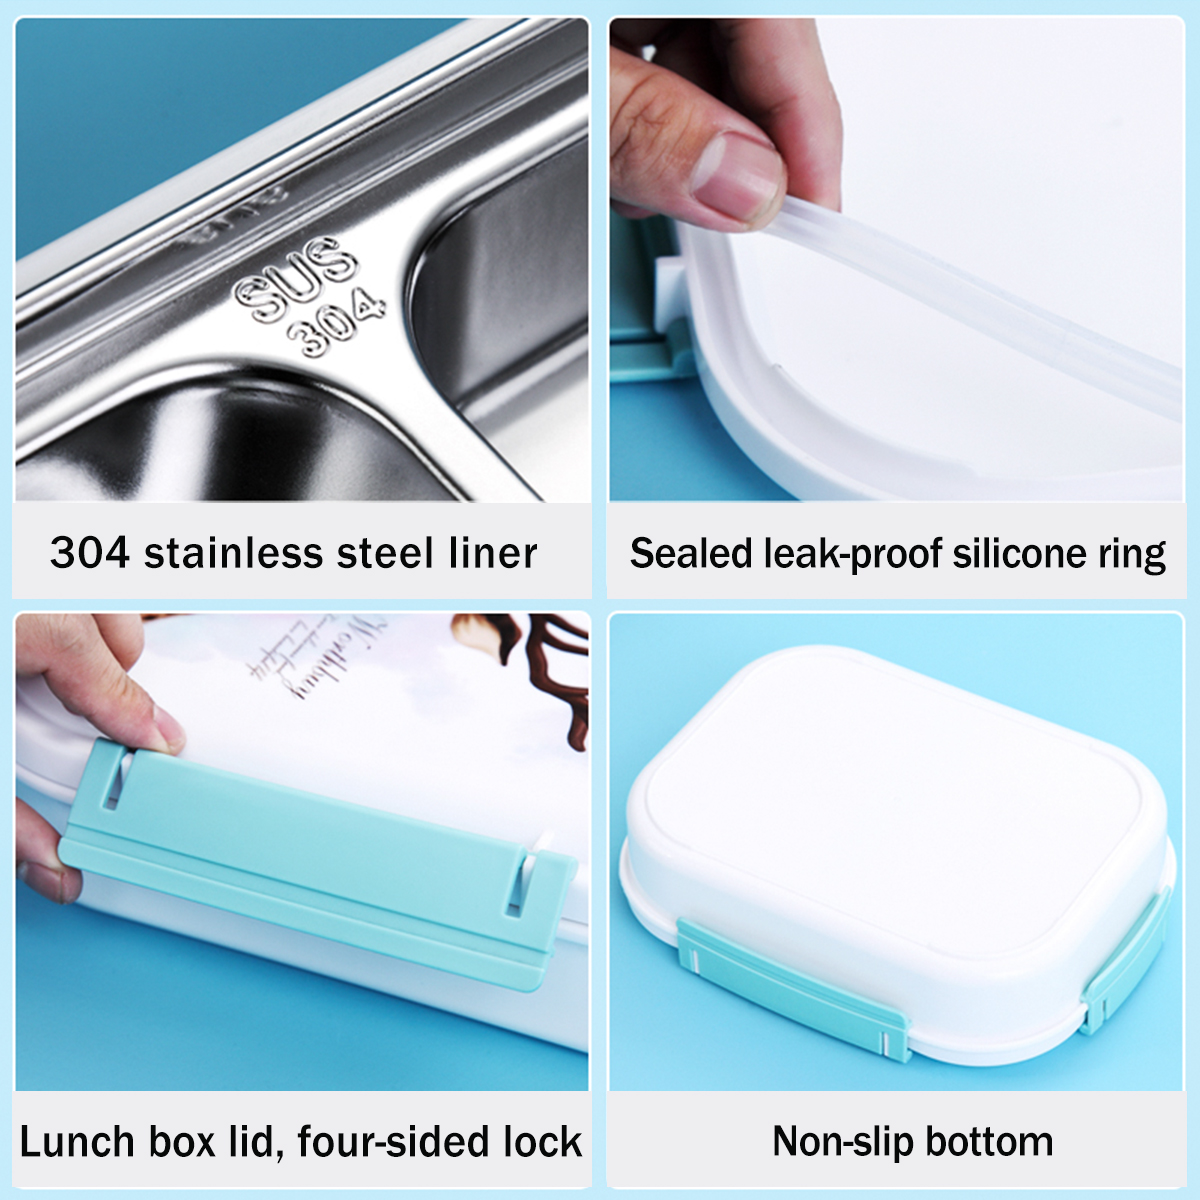 Outdoor-Picnic-Bento-Box-Stainless-Steel-Thermal-Food-Container-Lunch-Box-34-Grid-Japanese-Color-Pat-1428135-4